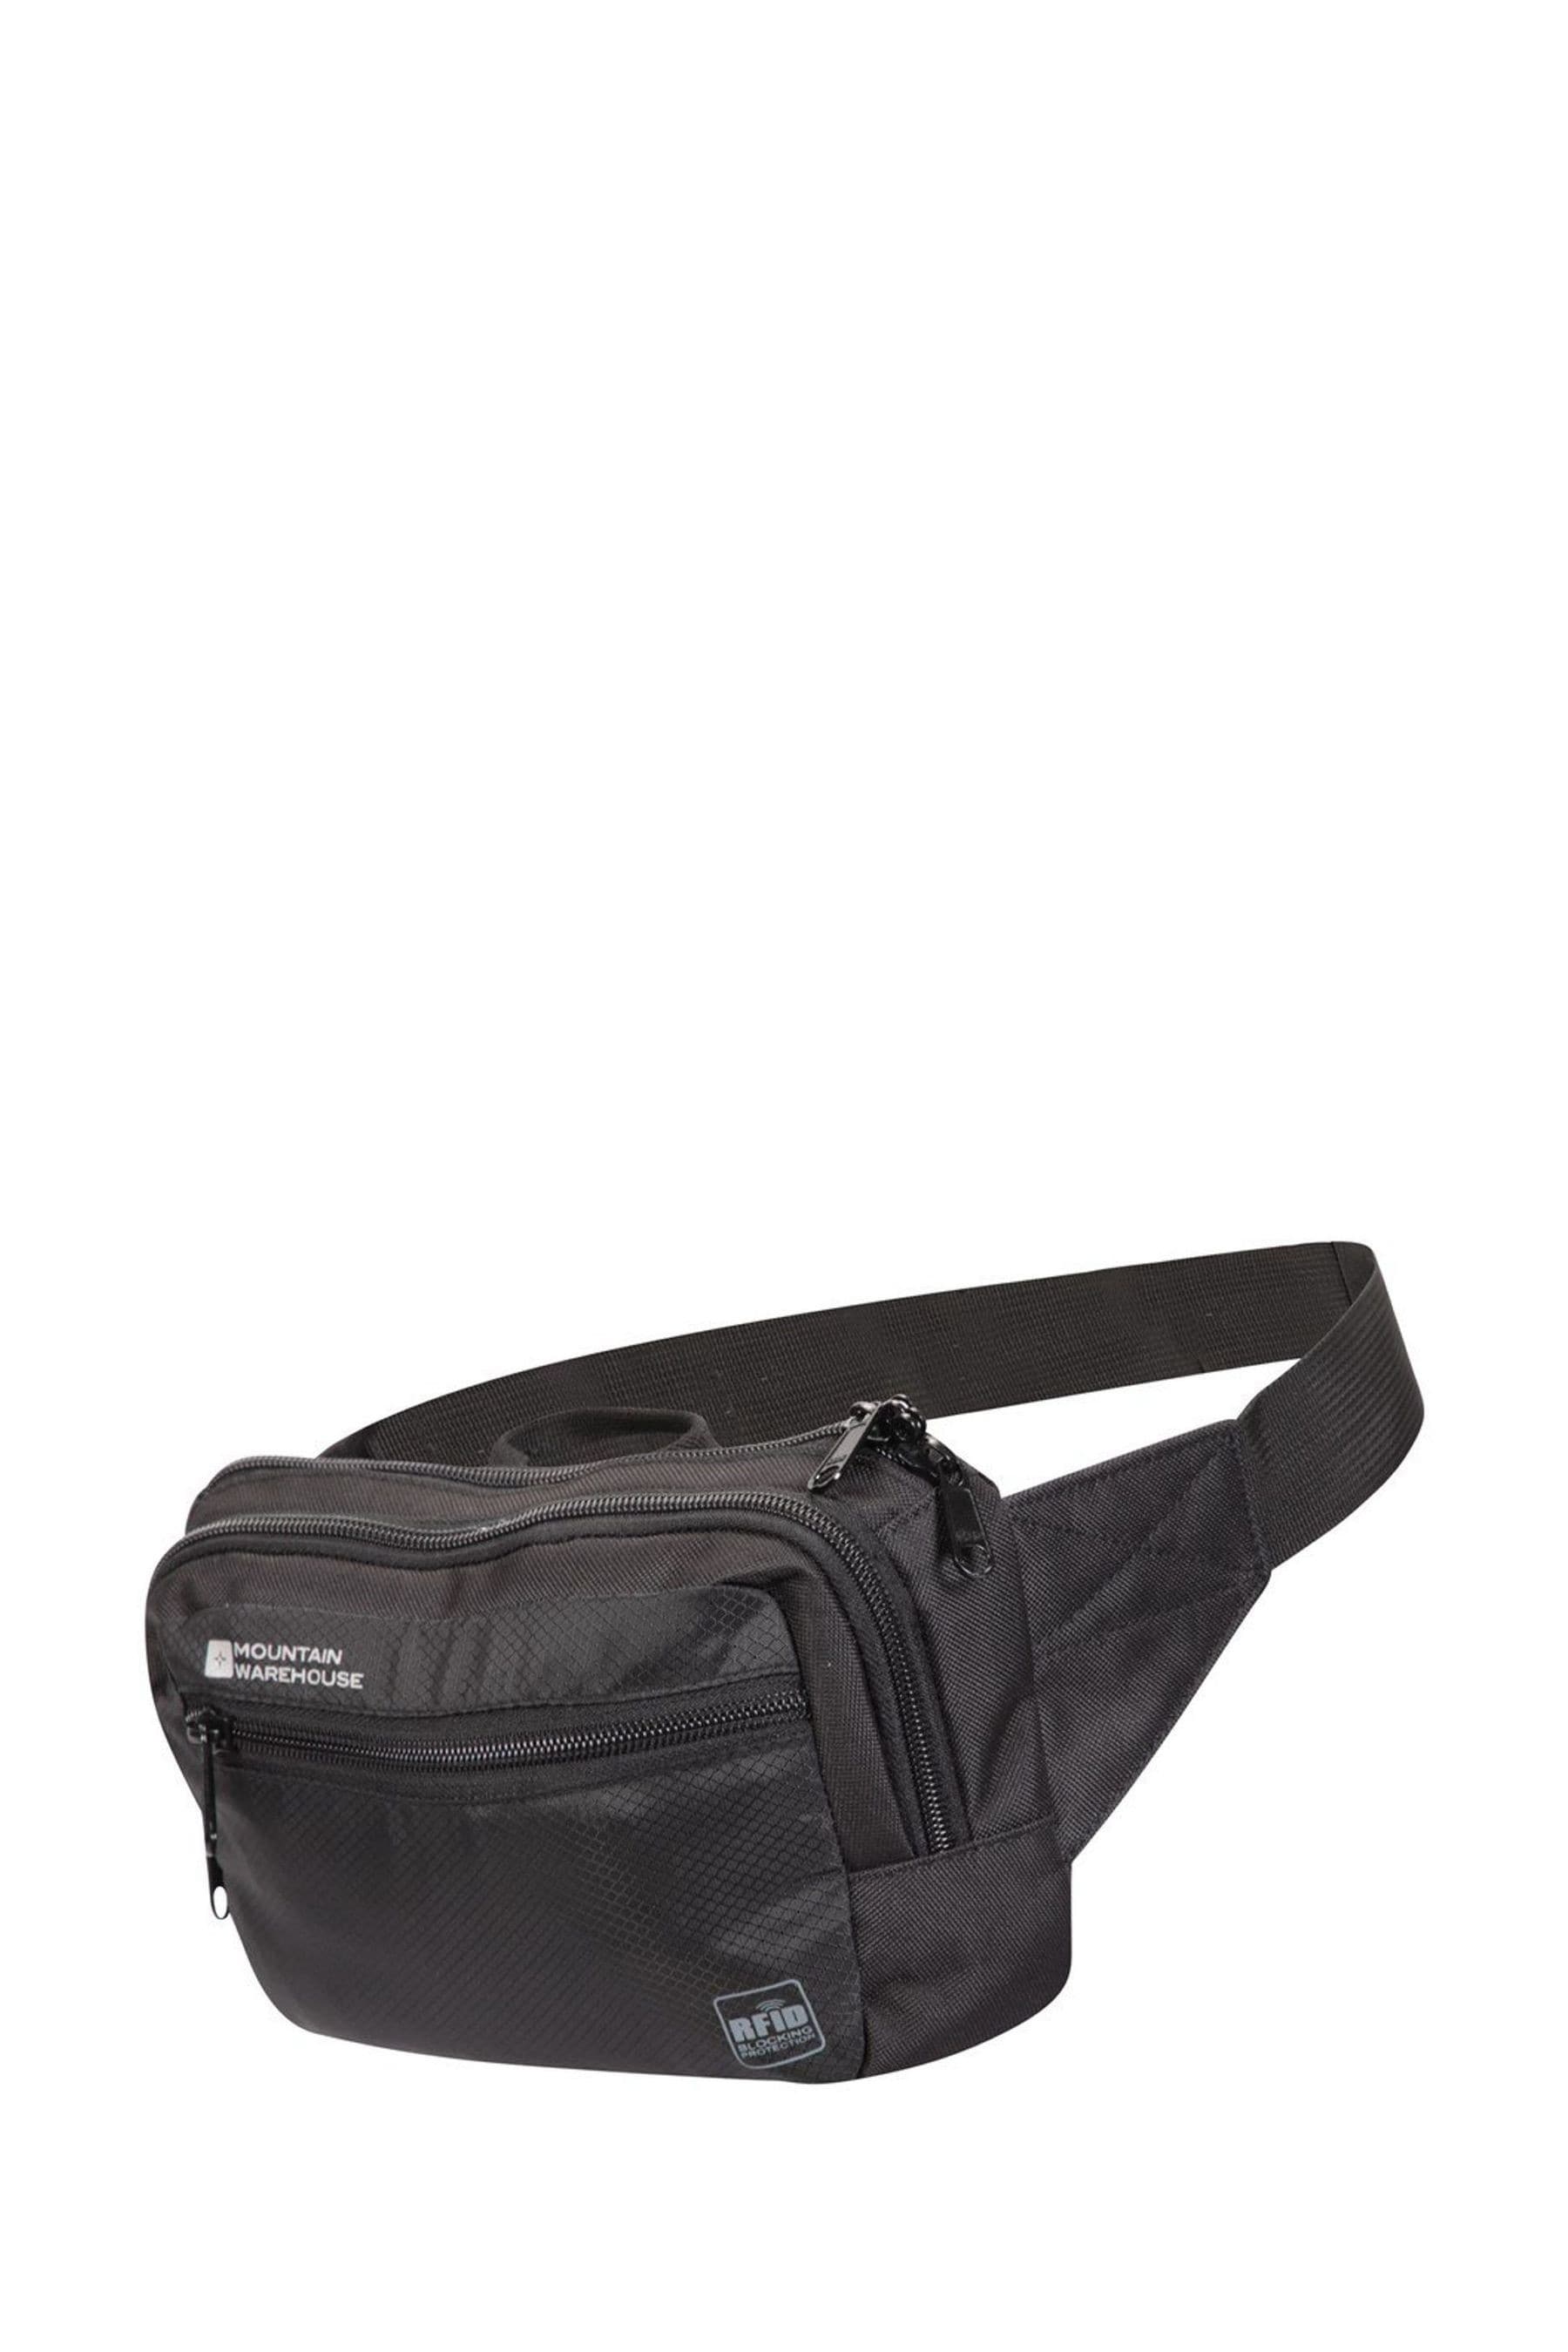 Buy Mountain Warehouse RFID Travel Bum Bag from the Next UK online shop